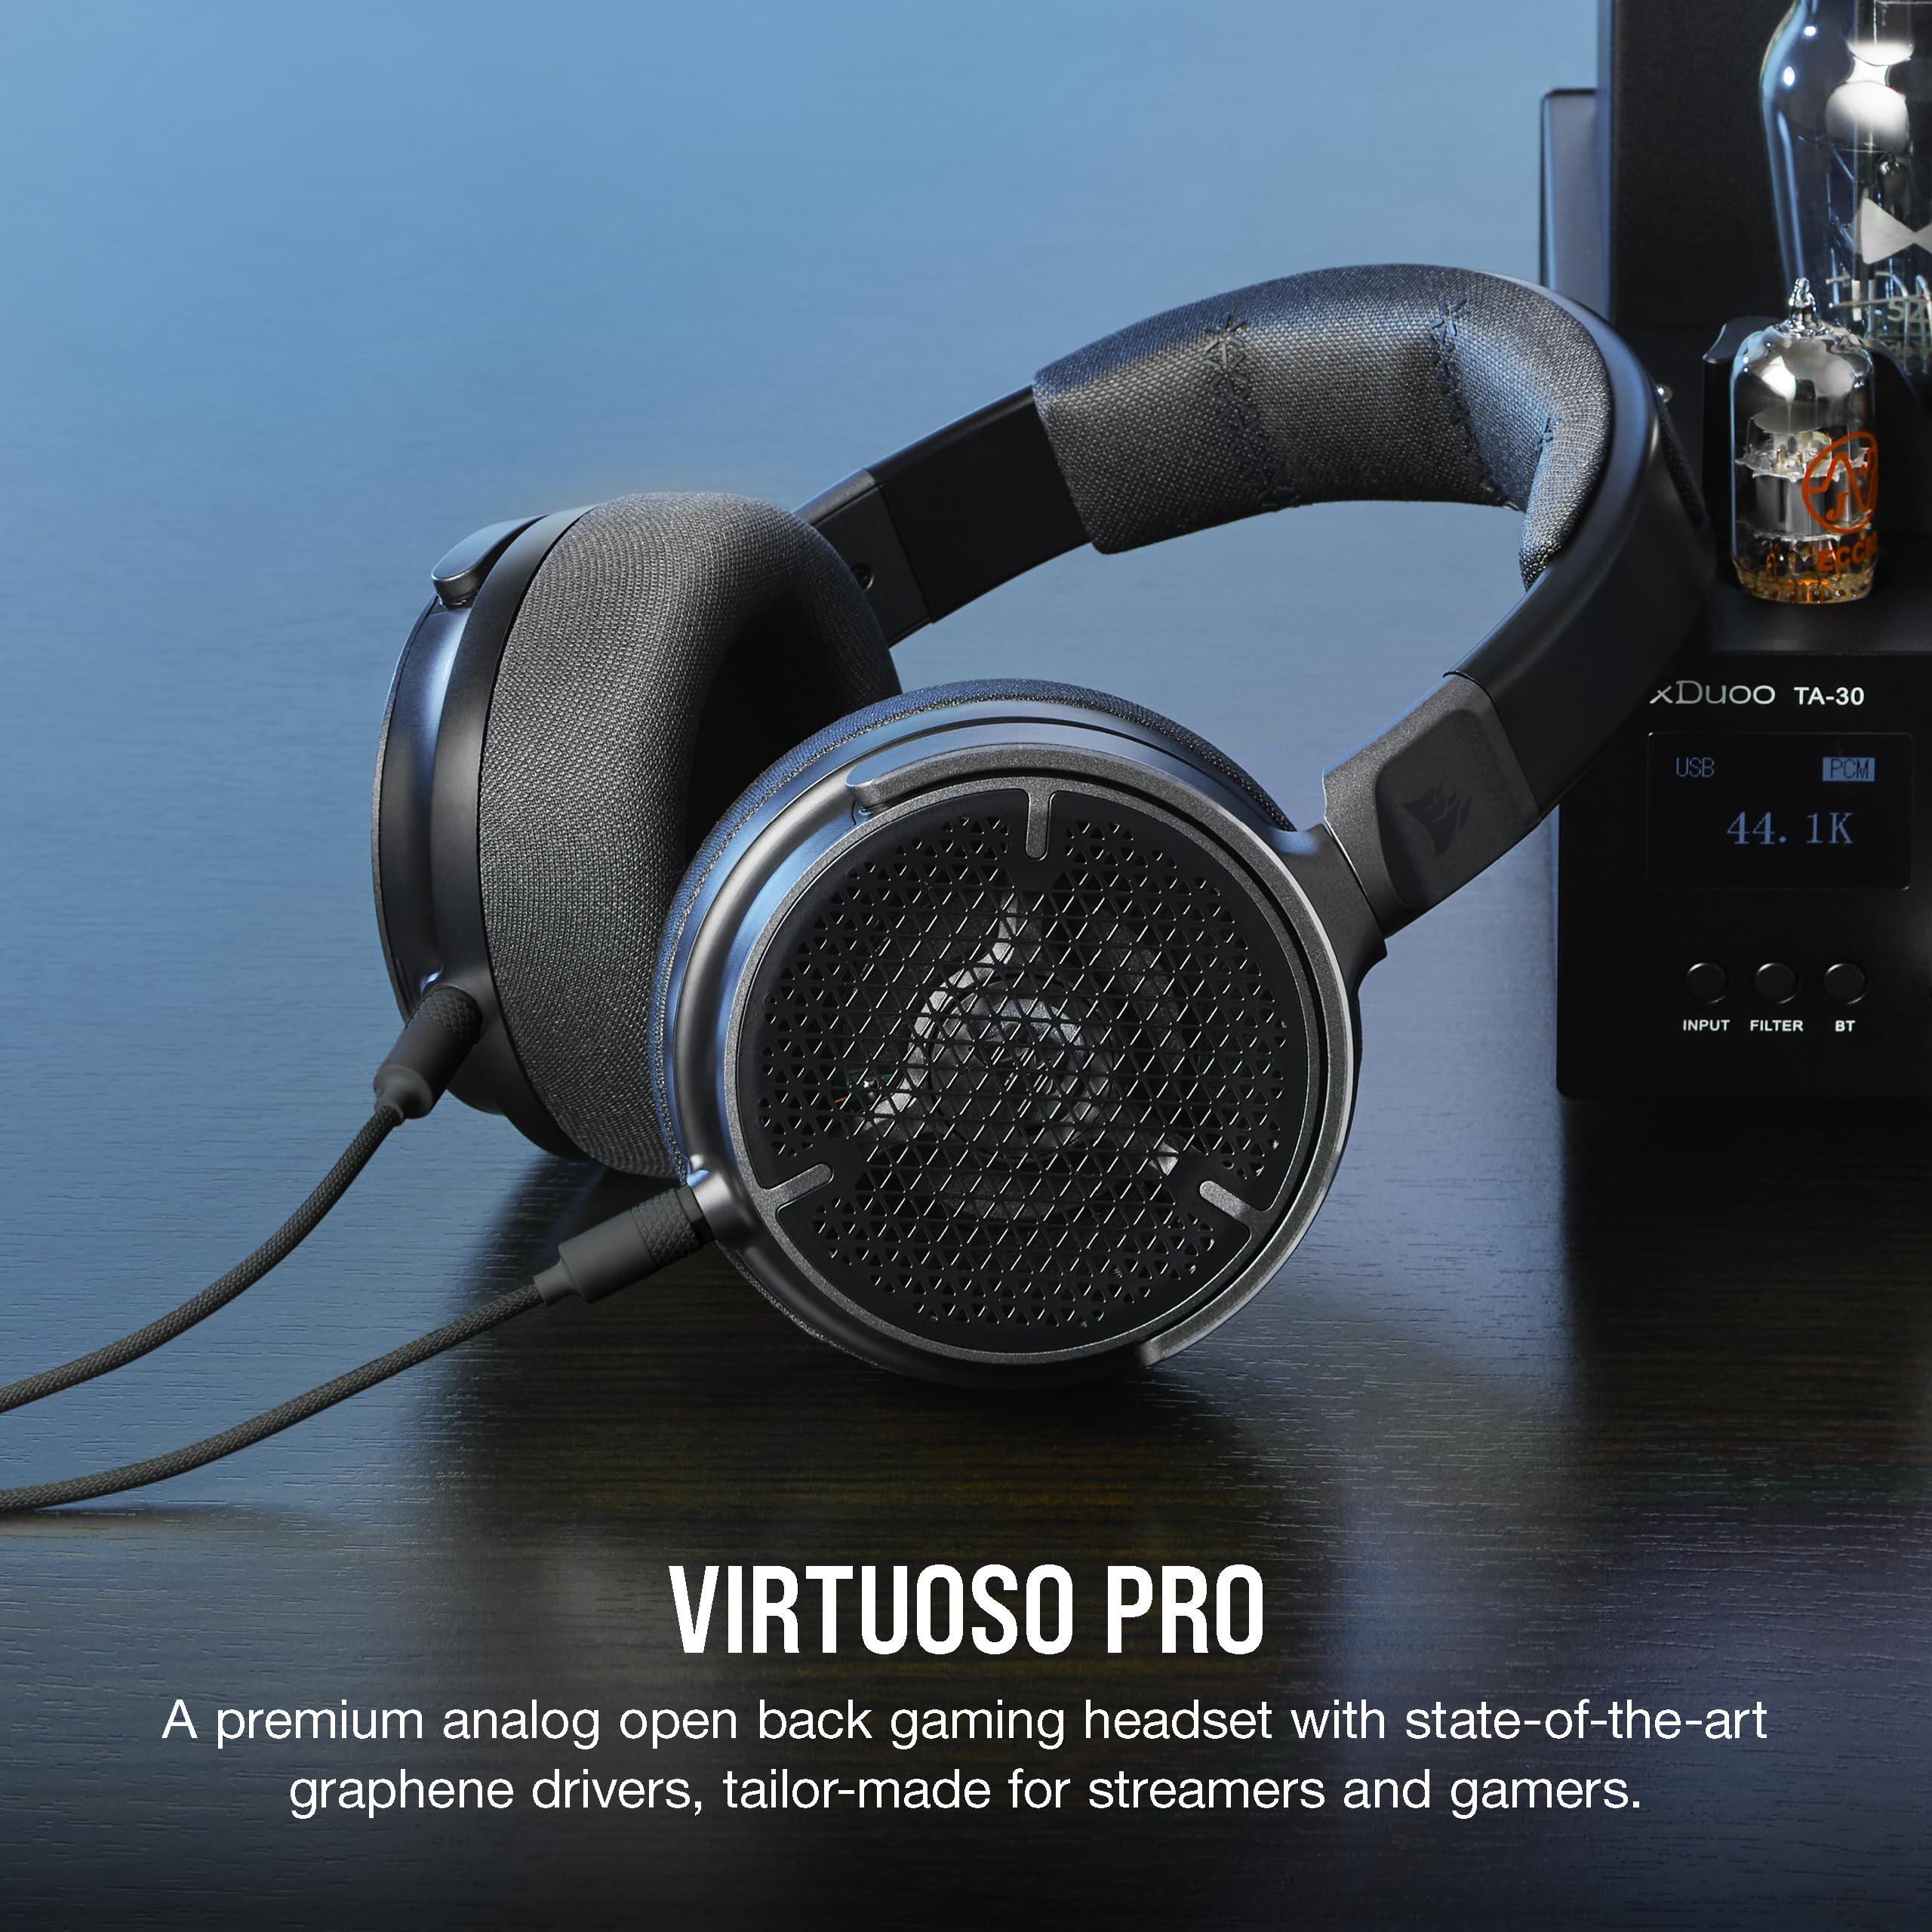 Corsair Virtuoso PRO Wired Open Back Gaming Headset - Detachable Uni-Directional Microphone - 50mm Graphene Drivers - 20Hz-40 kHz Frequency Response - Carbon